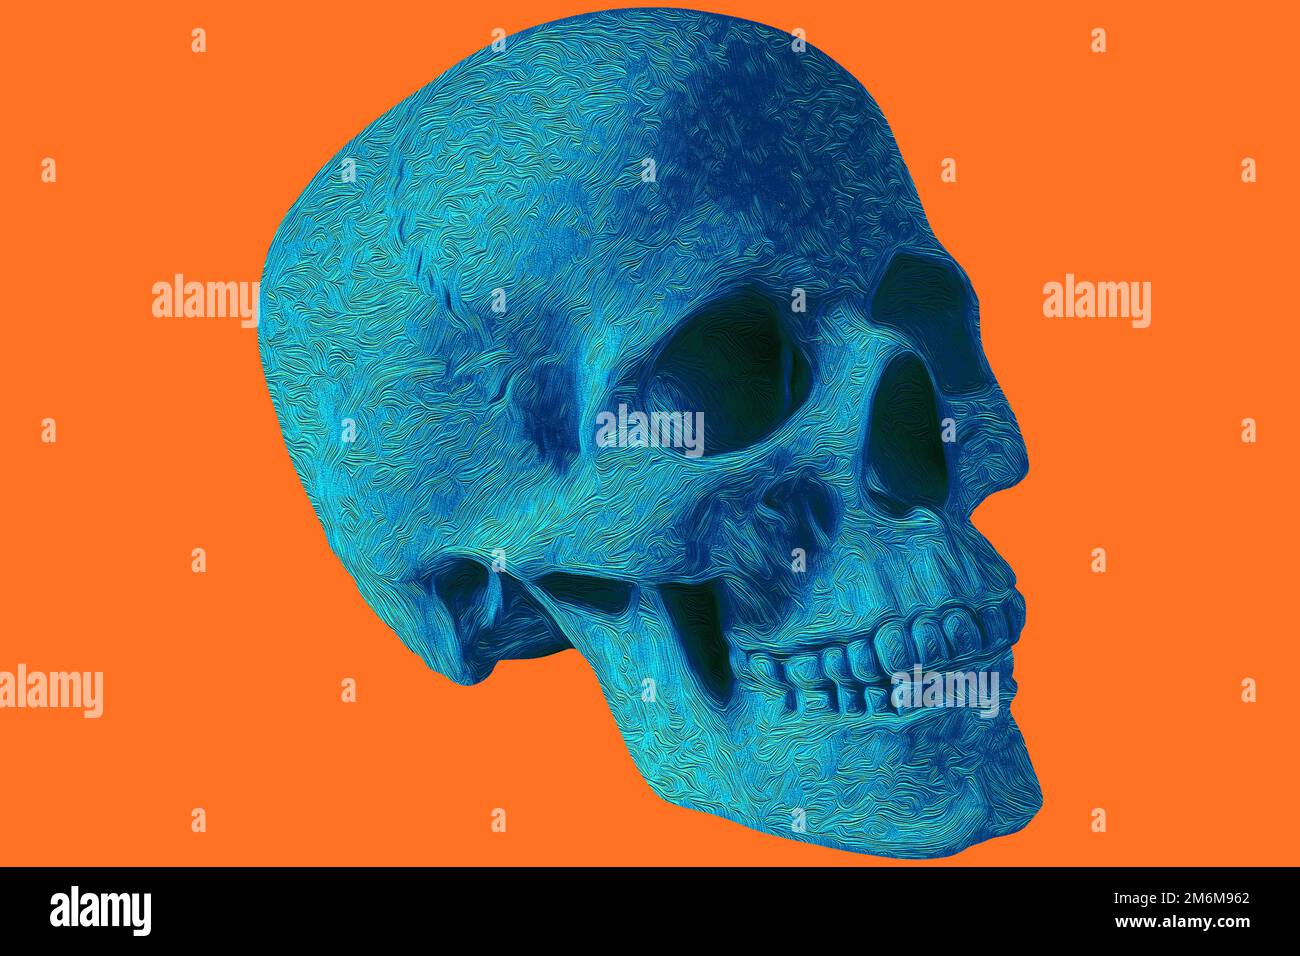 Modern creative colored graphic sculpture with multi background. Digital texture with human skull head in zine style. Contempora Stock Photo